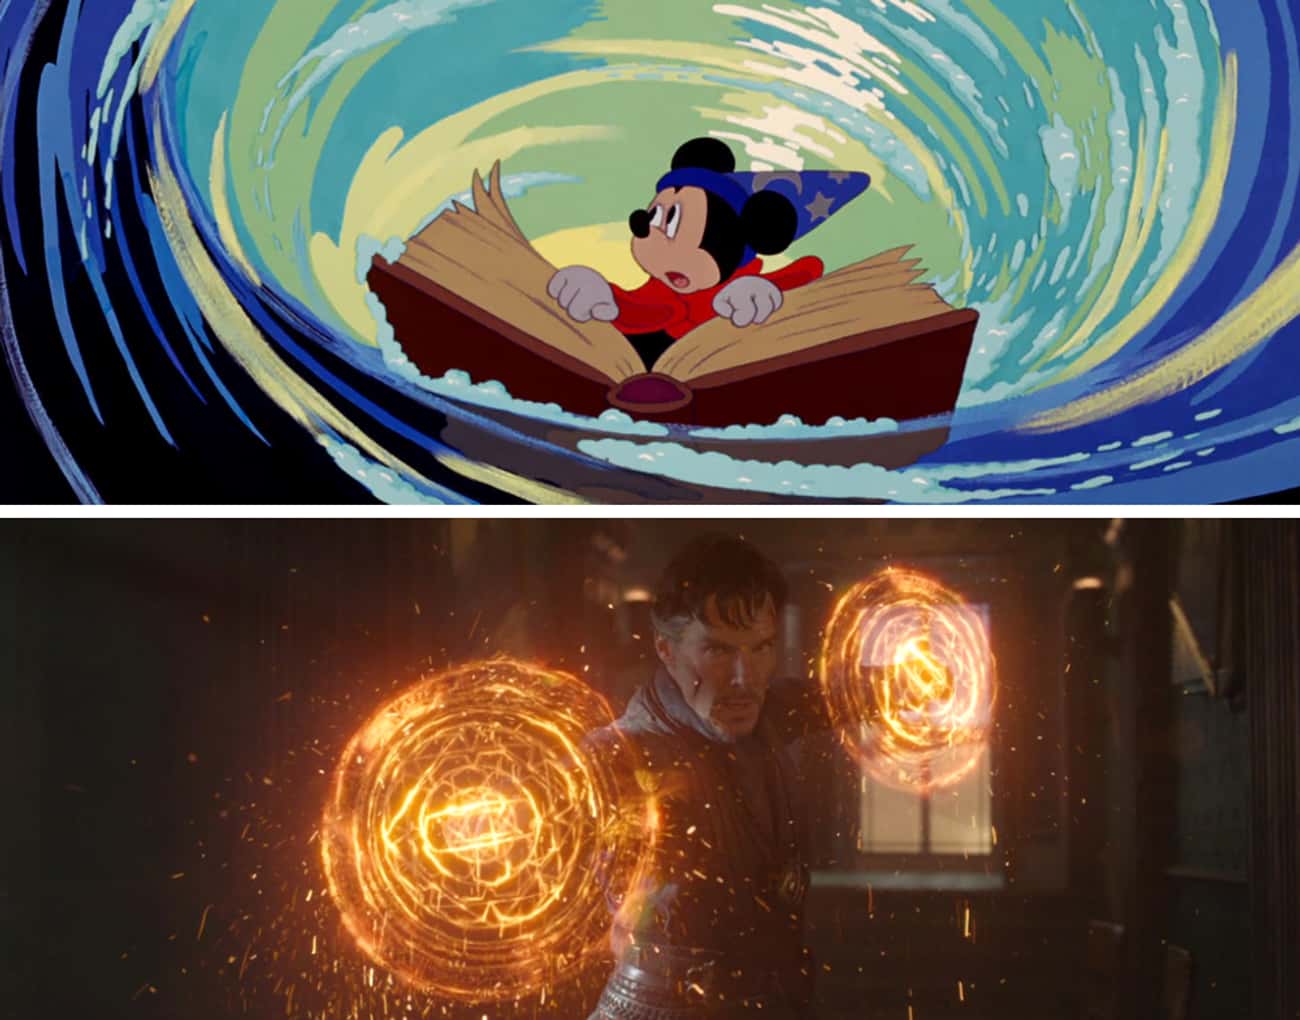 The Trippy Visual World Of 'Doctor Strange' Was Inspired By Disney's 'Fantasia'